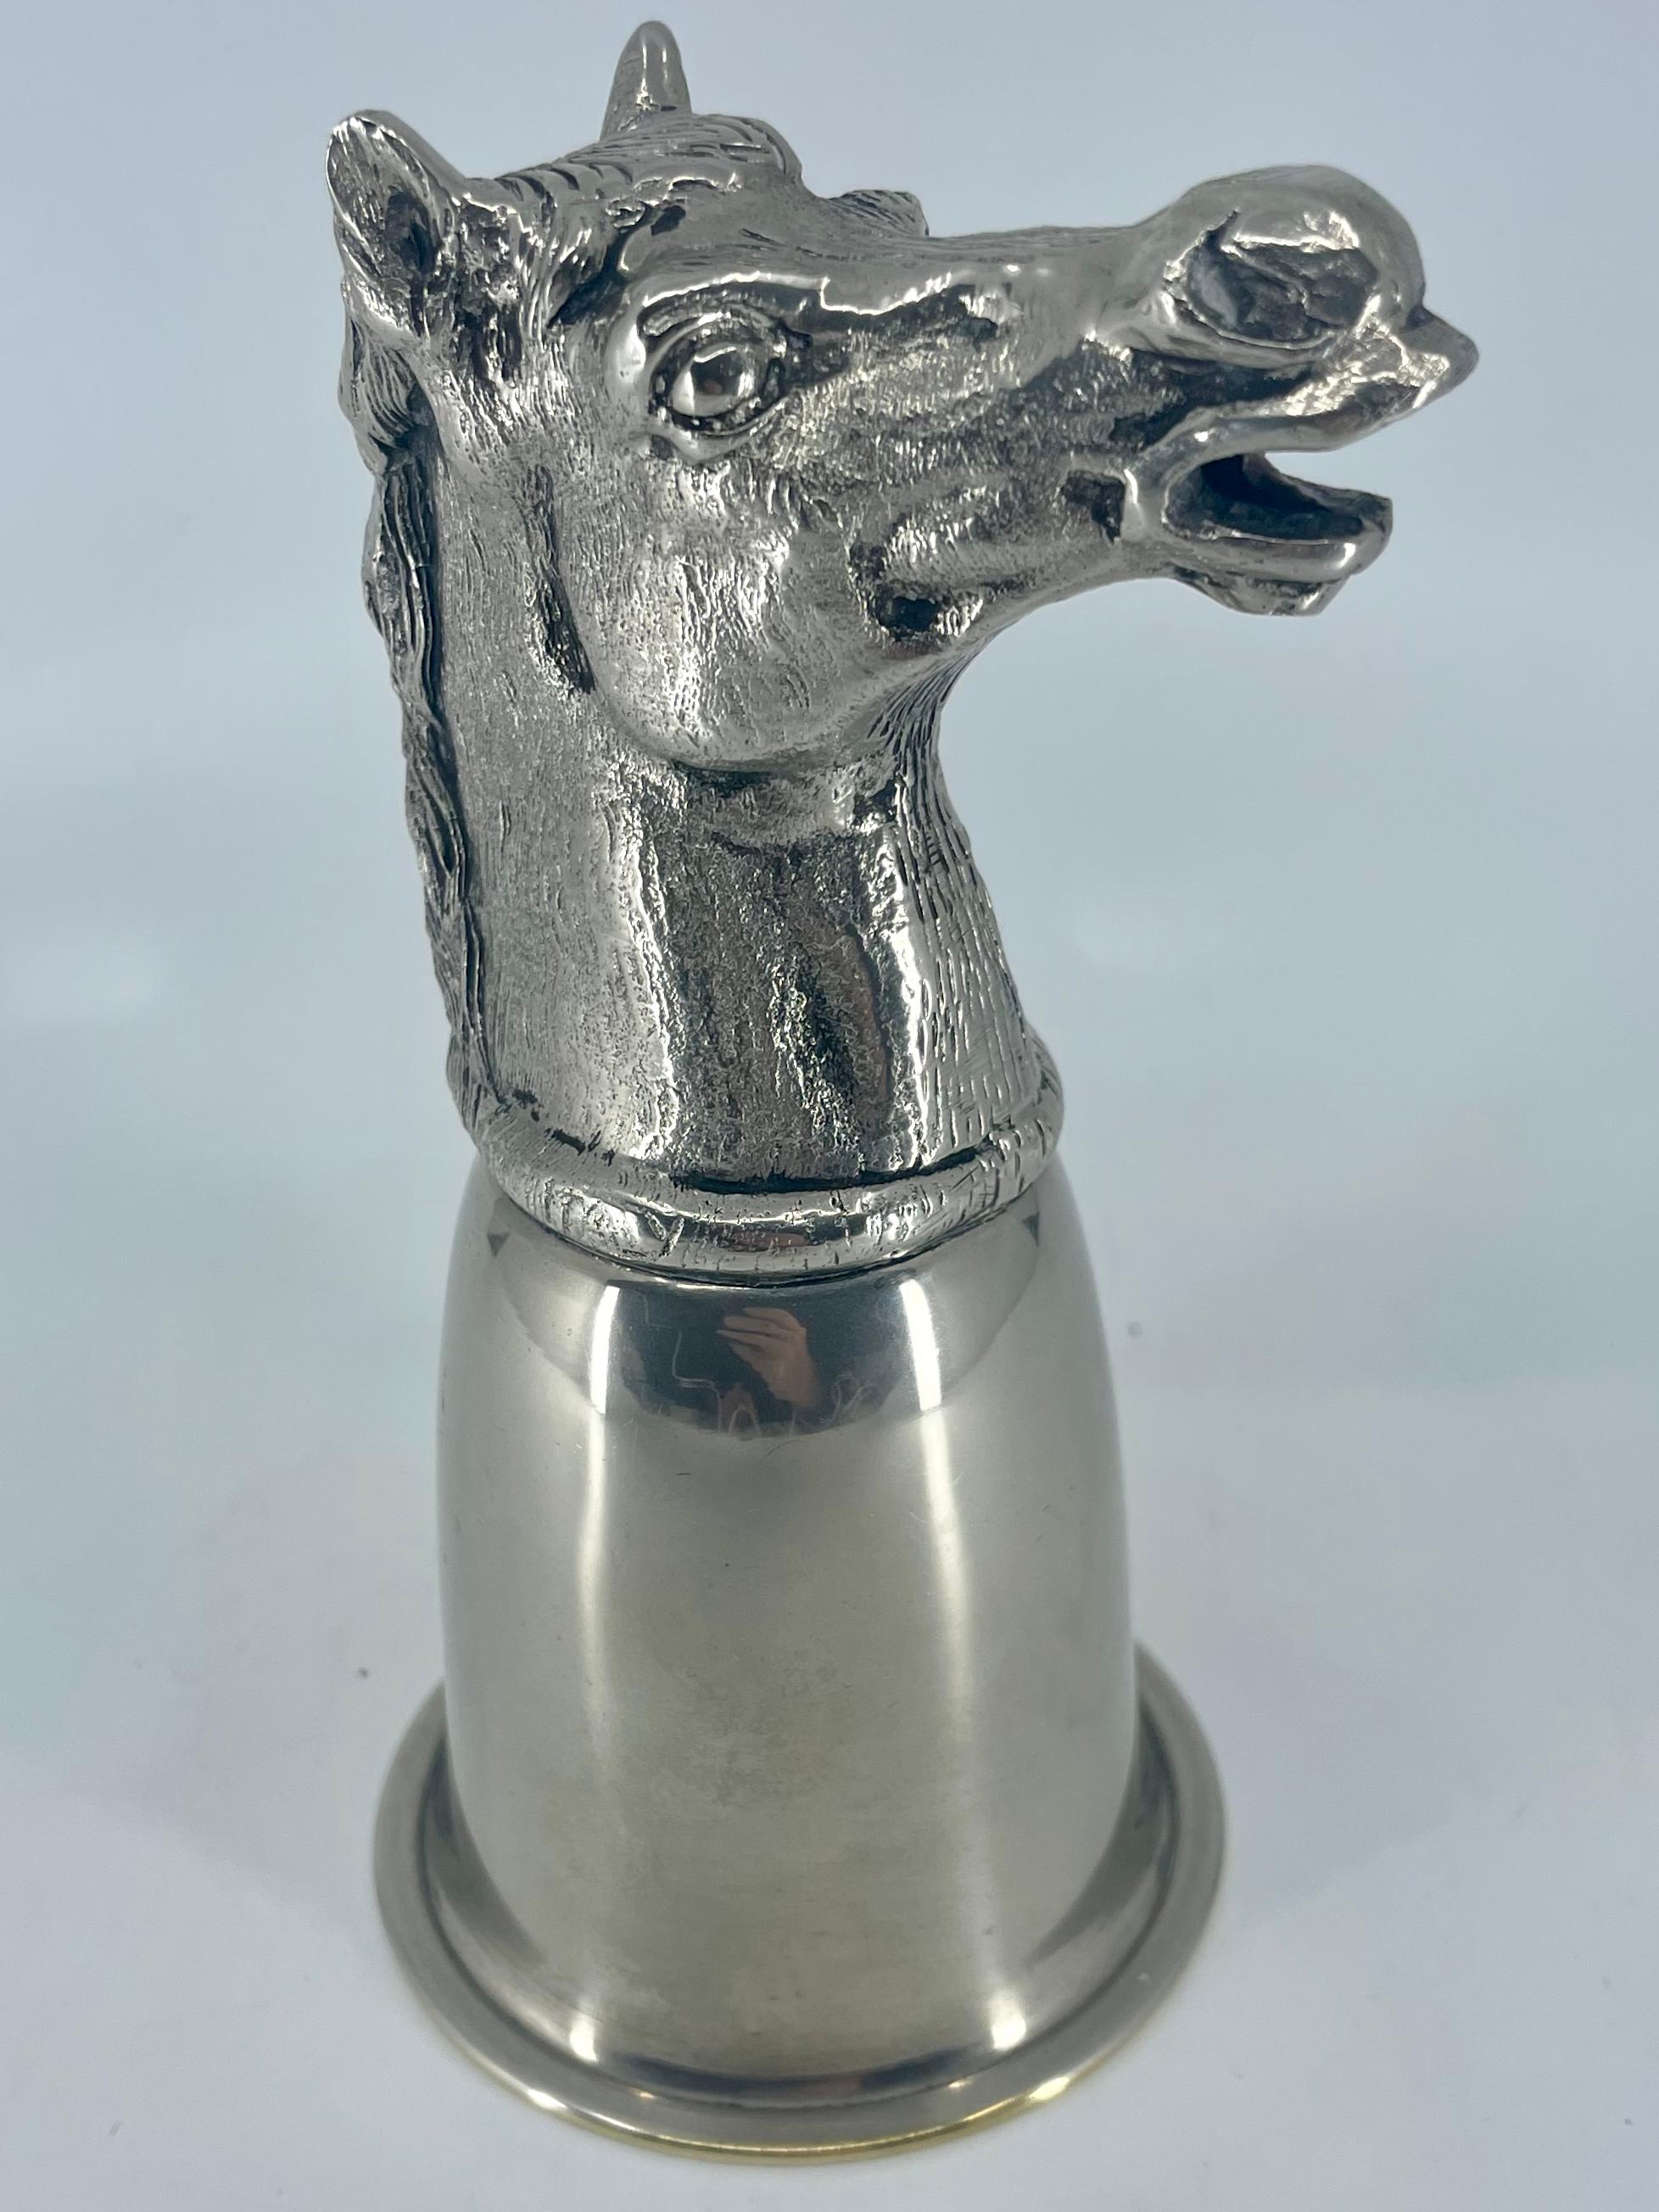 Gucci silver horse stirrup cup. Vintage Italian silverplate horse head stirrup cup with gold wash to interior of cup with stamps for Gucci and Italy, and with “Victory” engraved in Italian to one side; a fitting trophy for your winning Amazone or